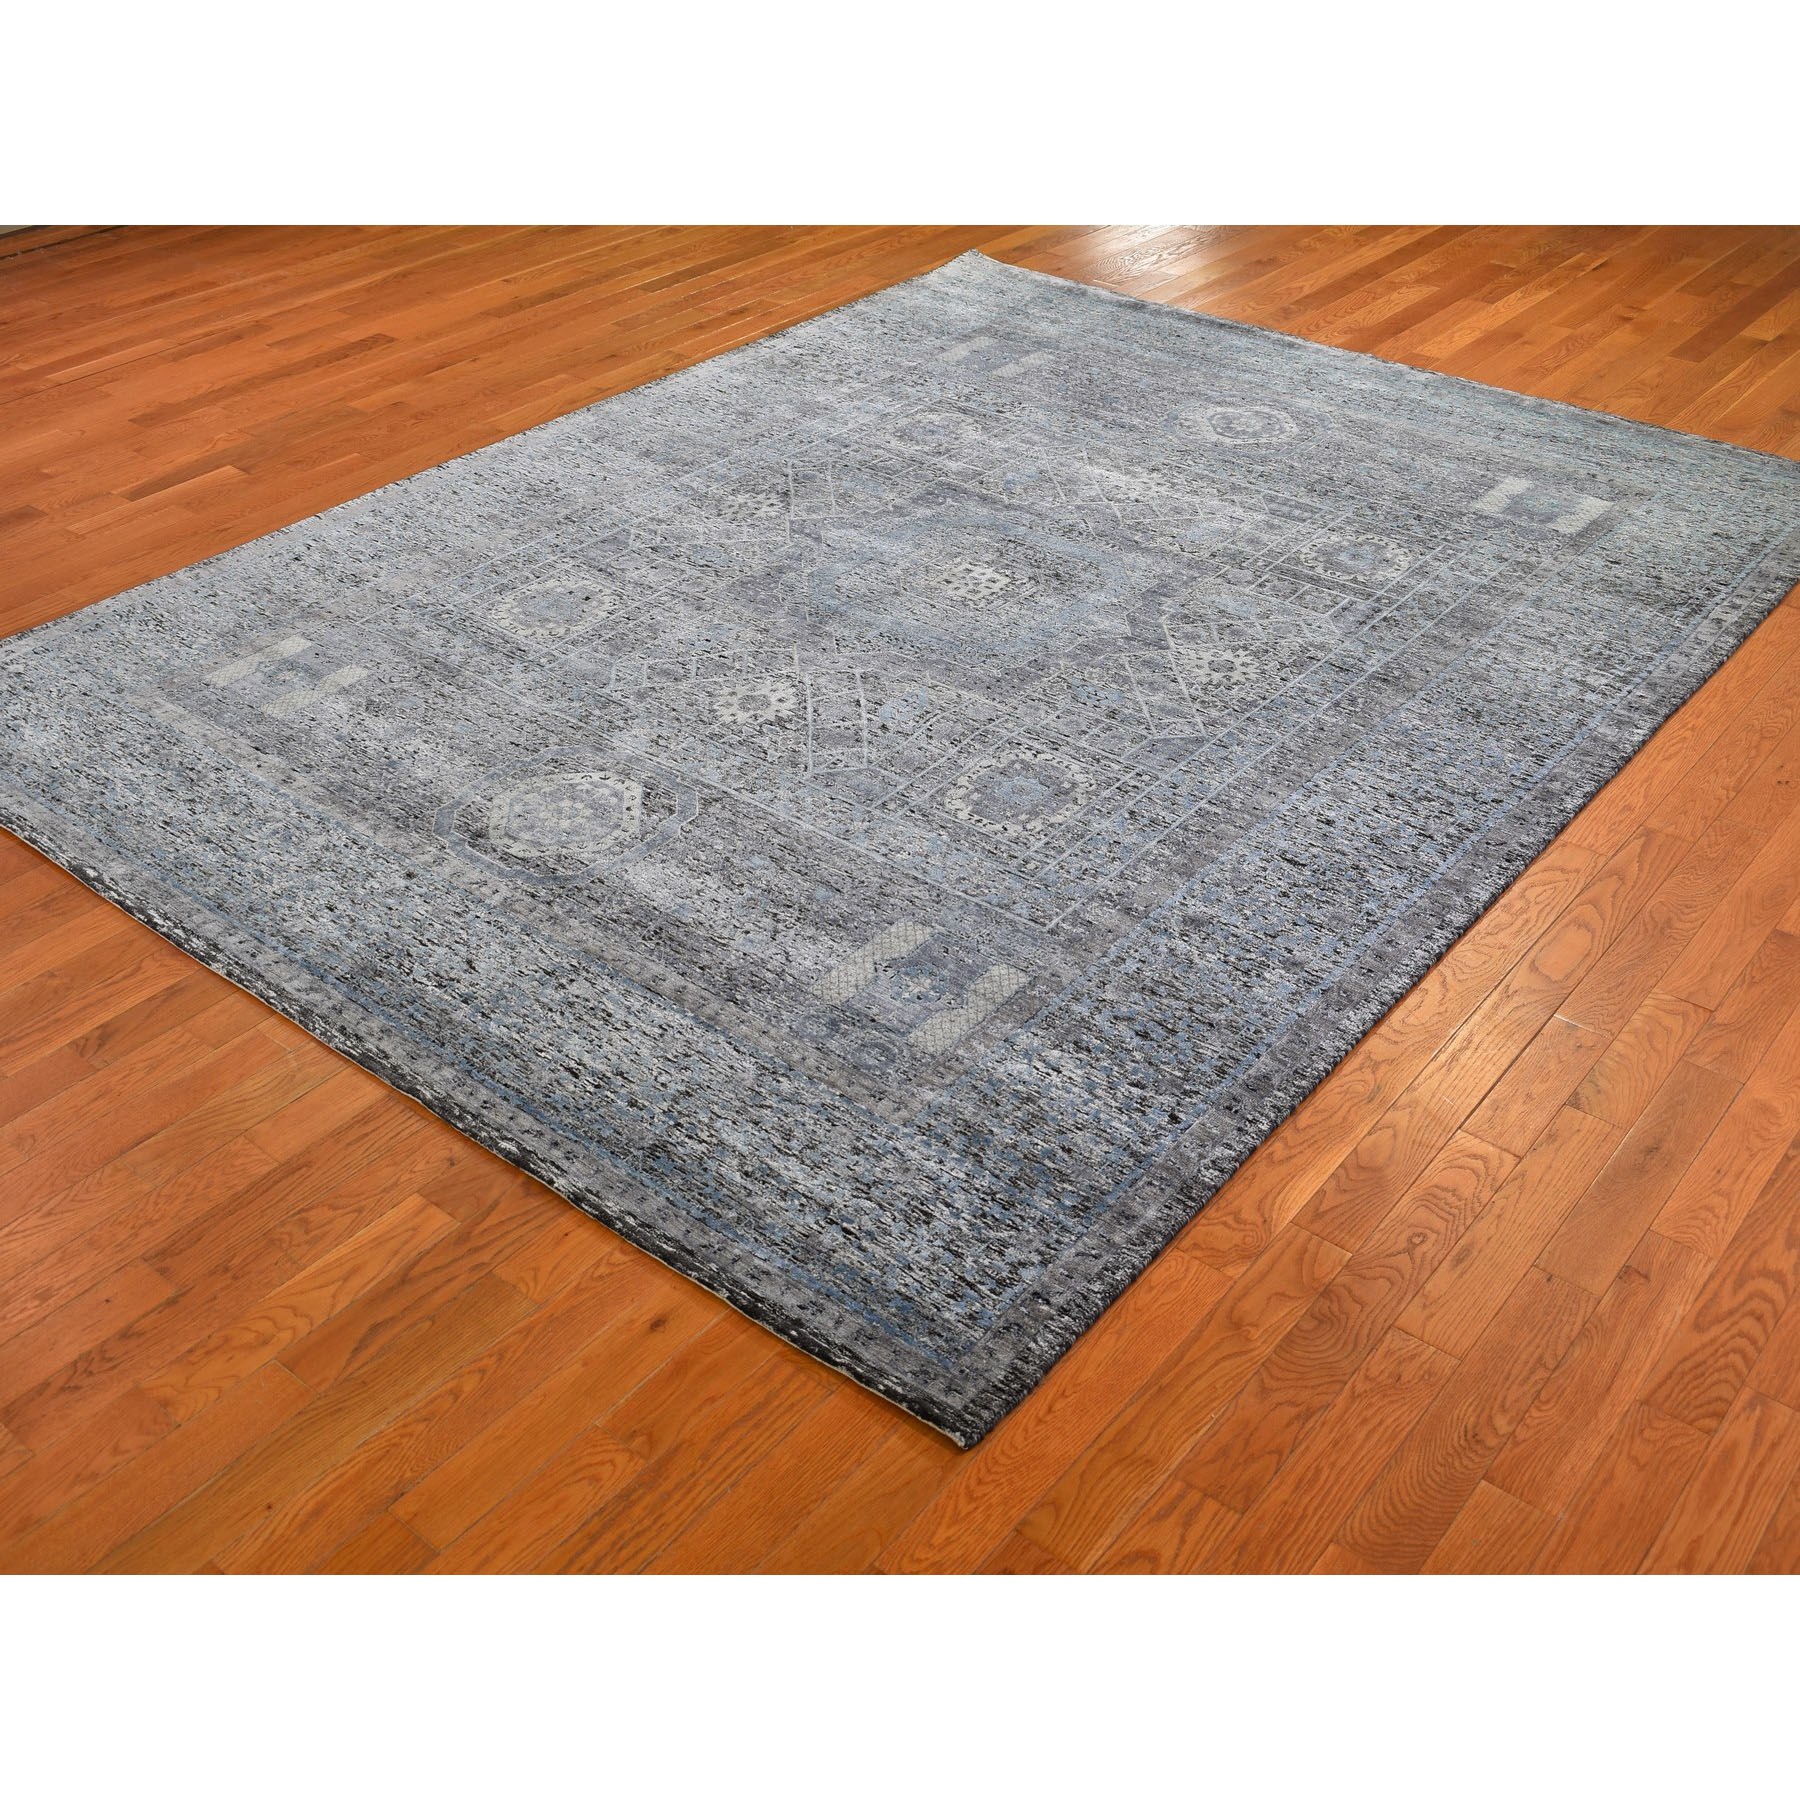 8-x10-3  Silk With Textured Wool Hi-Low Pile Mamluk Design Hand Knotted Oriental Rug 